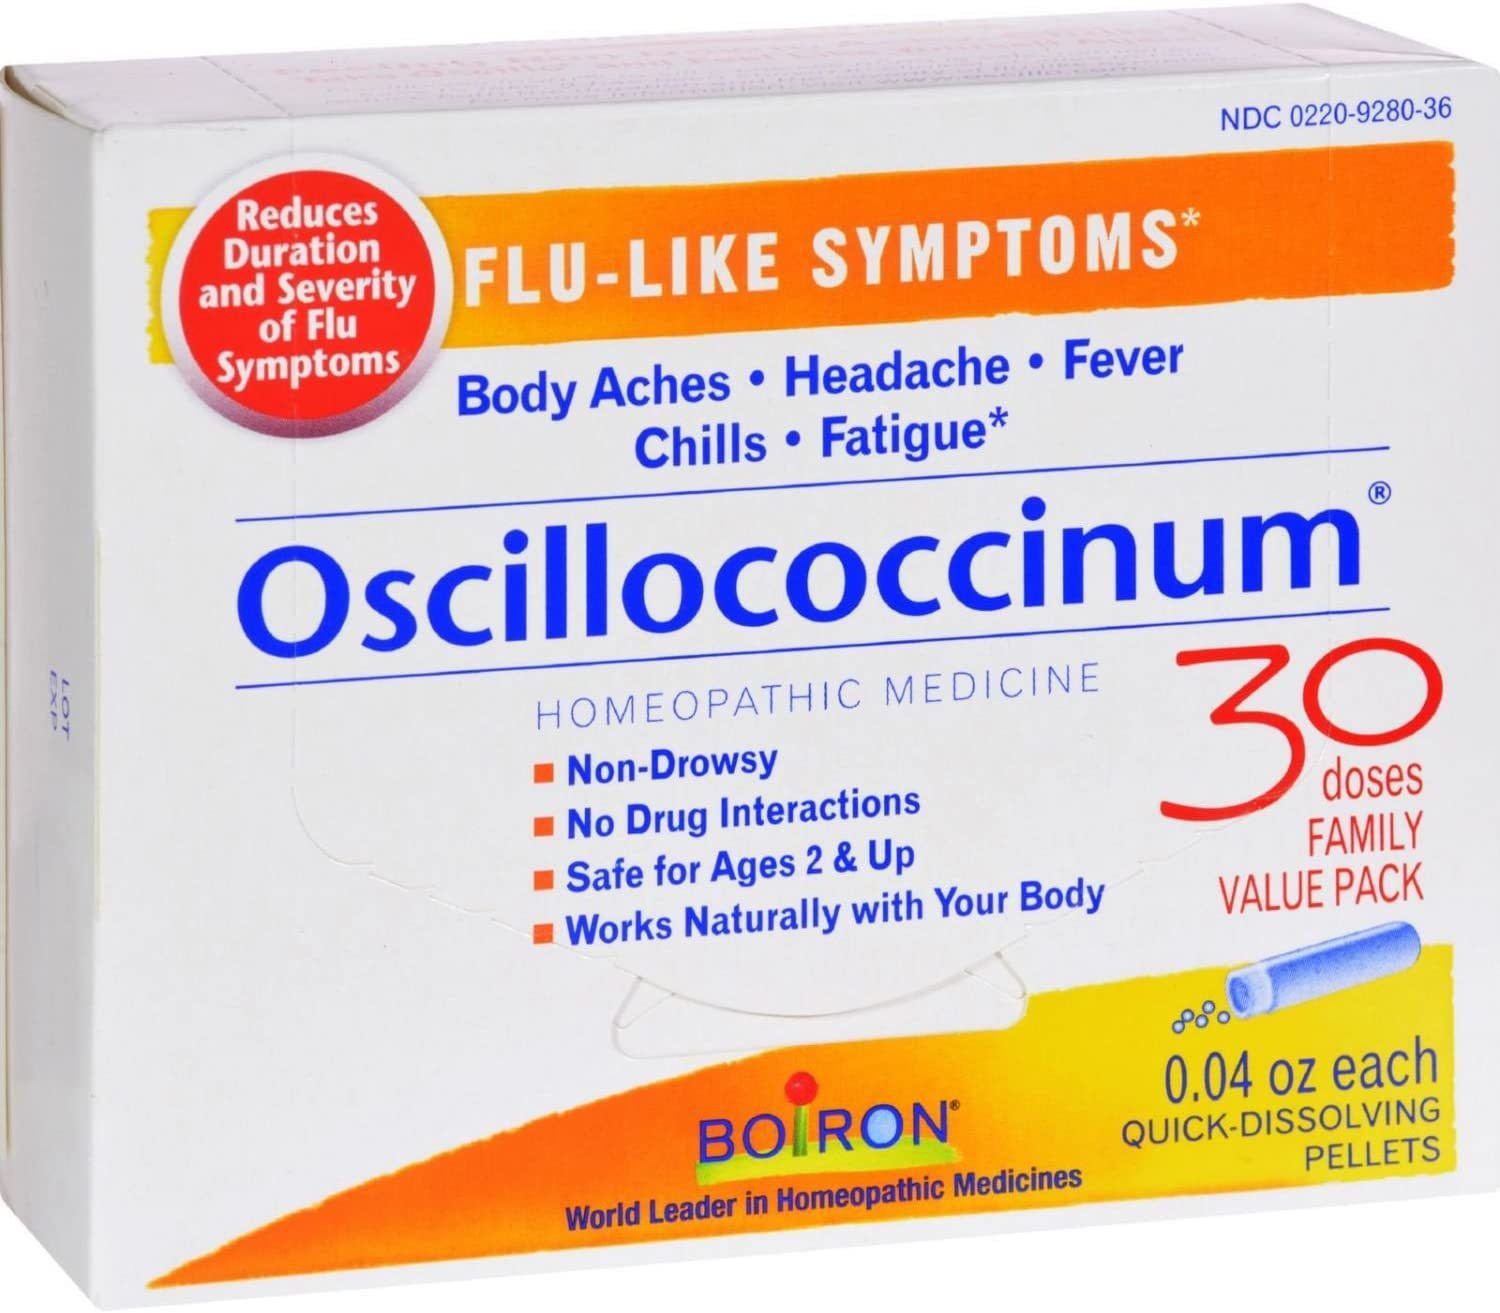 Oscillococcinum 30 Doses Homeopathy For Cold and Flu -  Boiron